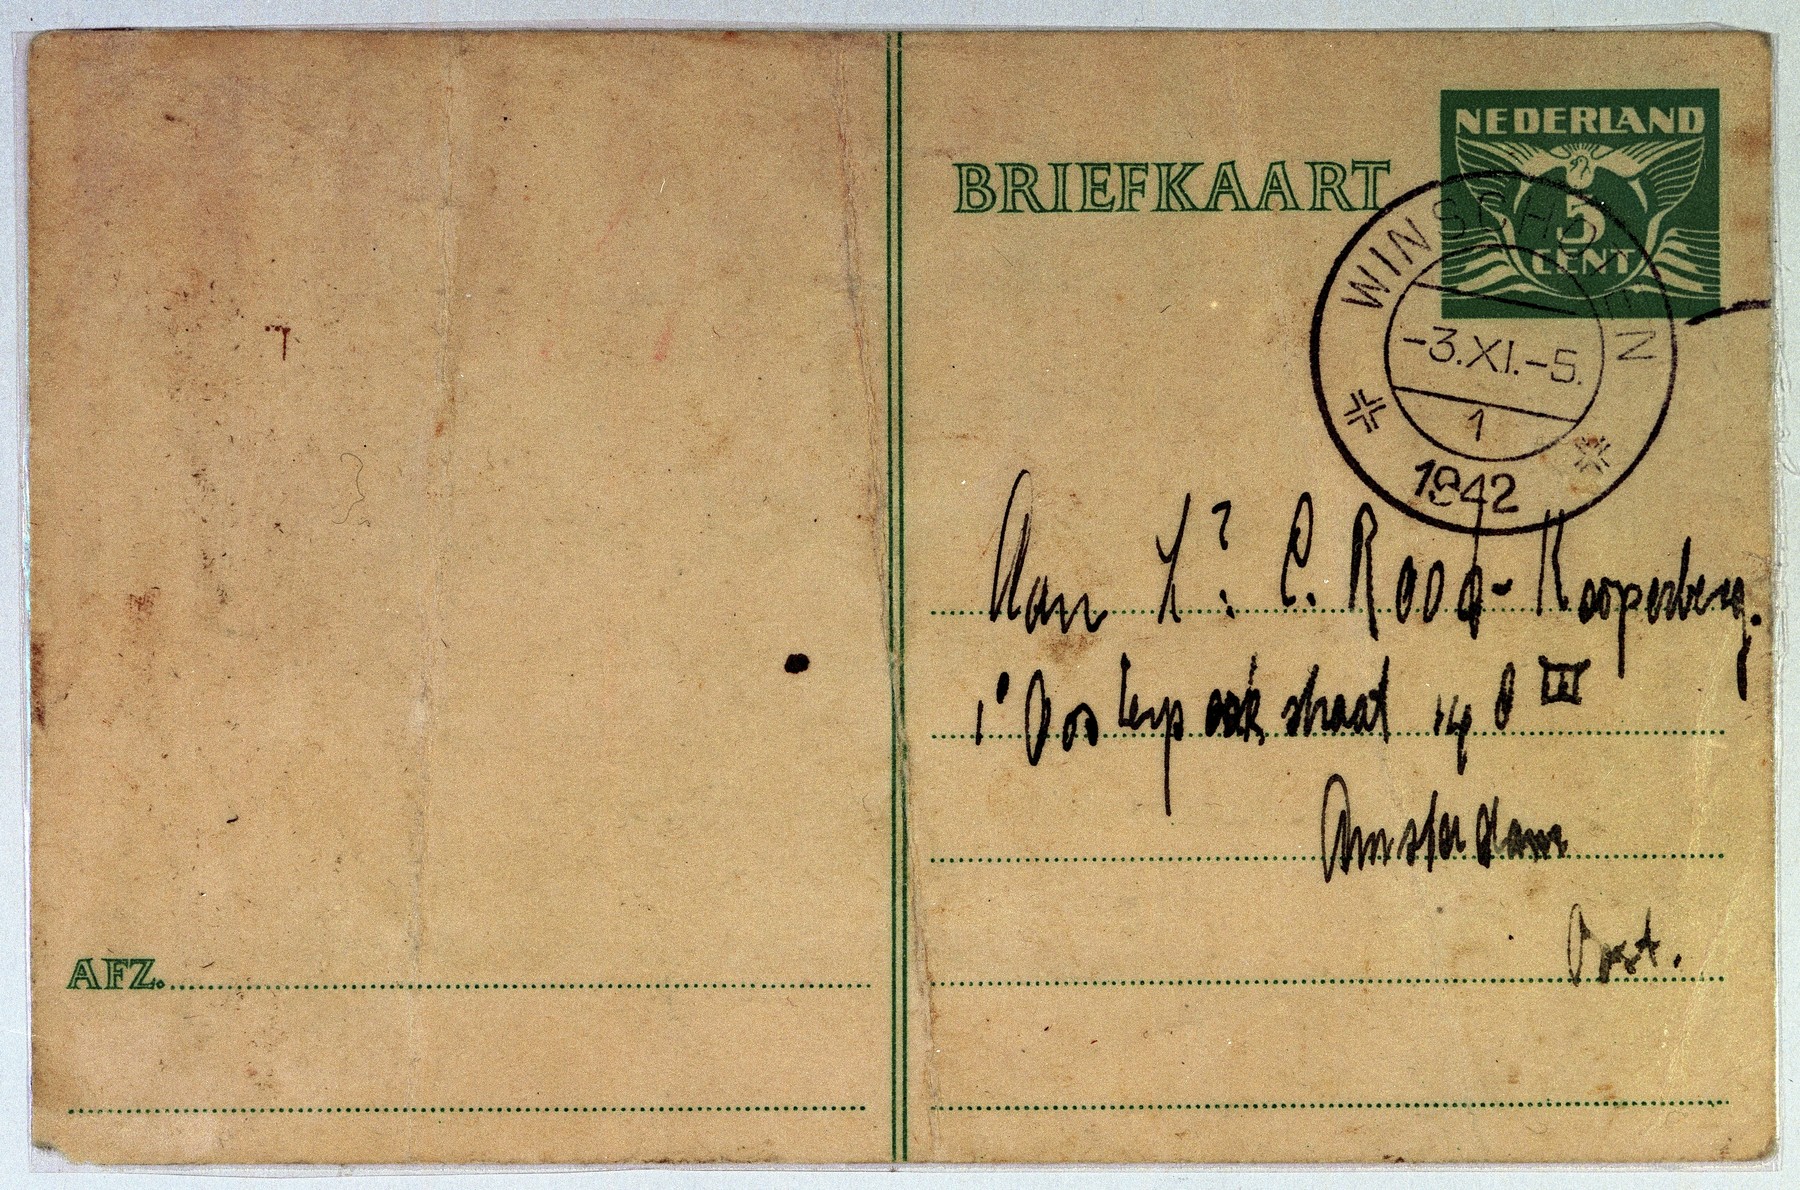 Postcard written from Coenraad Rood to his wife Elisabeth shortly from the deportation train from the Westerbork camp.

He writes, "My love!  I kept going despite trying everything. I cannot wait for you. Keep up your strength; be healthy and strong, I’ll see you soon. I’ll come back. Regards to all, kiss mother, Jo, and Lien for me. I kiss you a hundred thousand times."